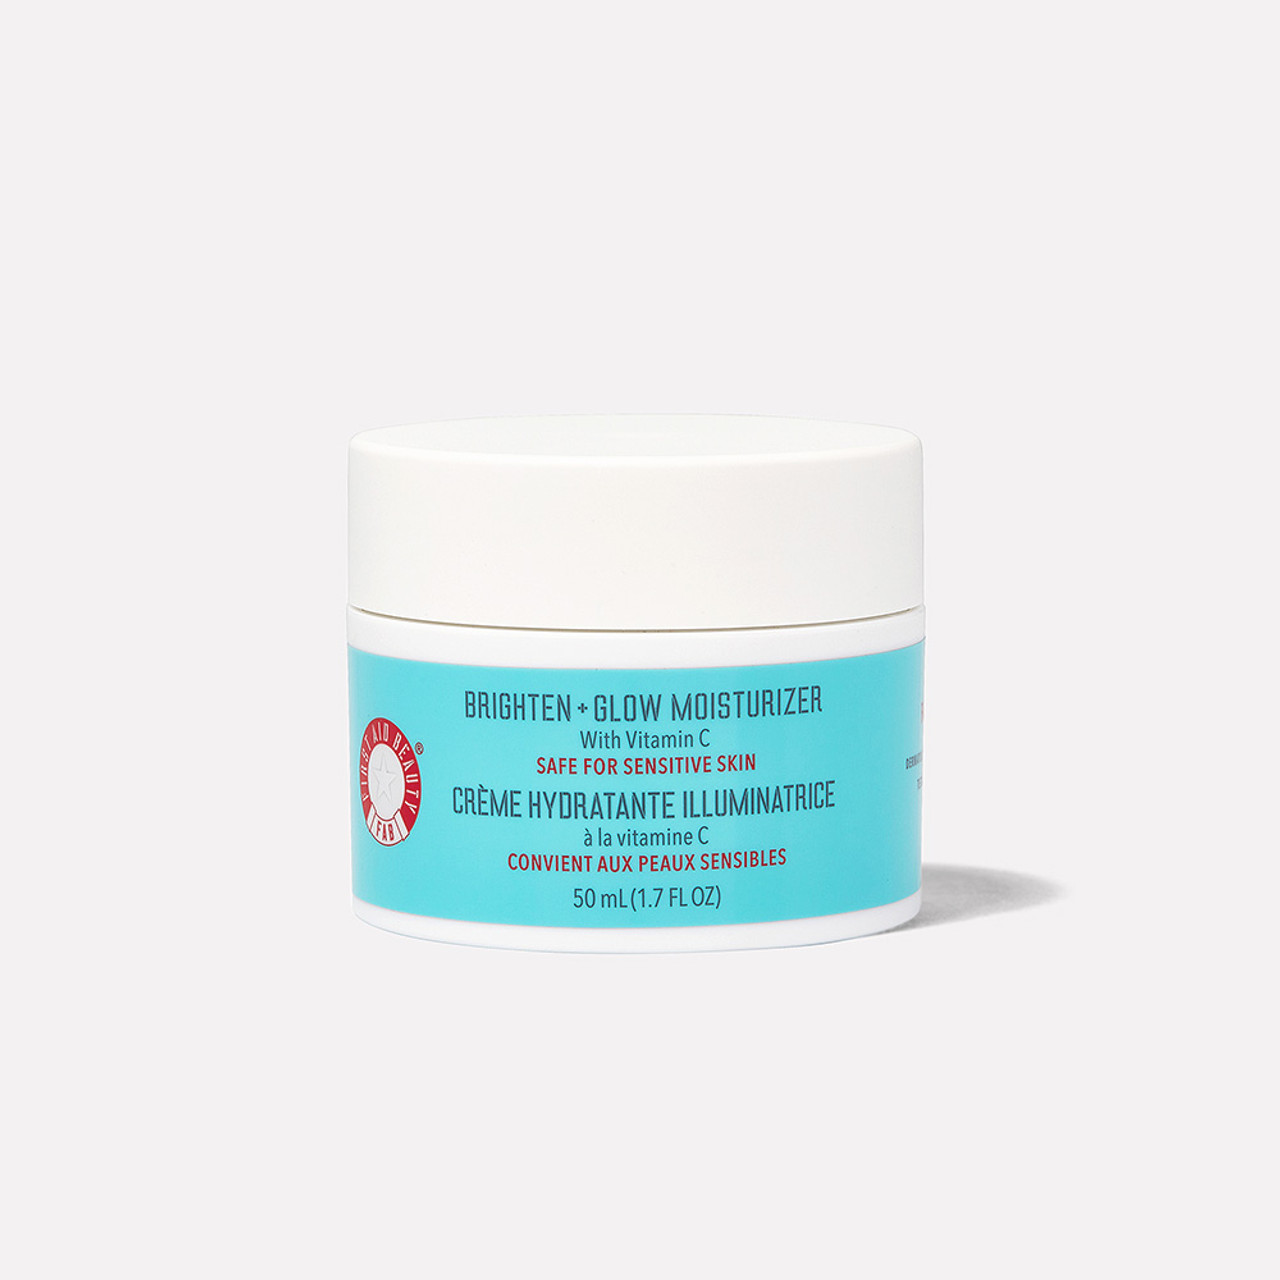 First Aid Beauty Face Moisturizer Gives an Editor Glowing Skin